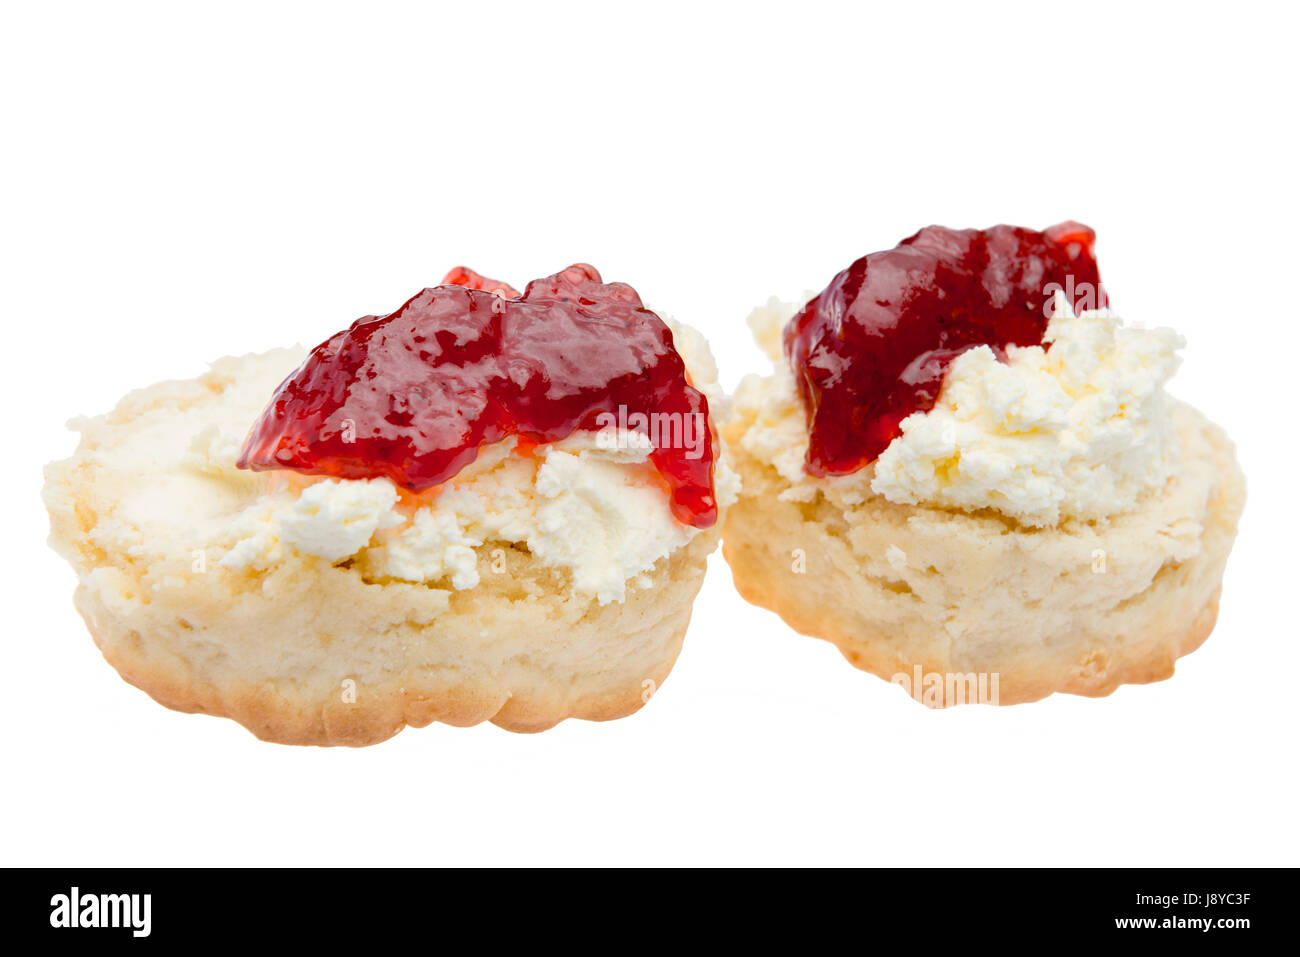 Scone with whipped cream and strawberry jam, cut out or isolated against a white background. Stock Photo